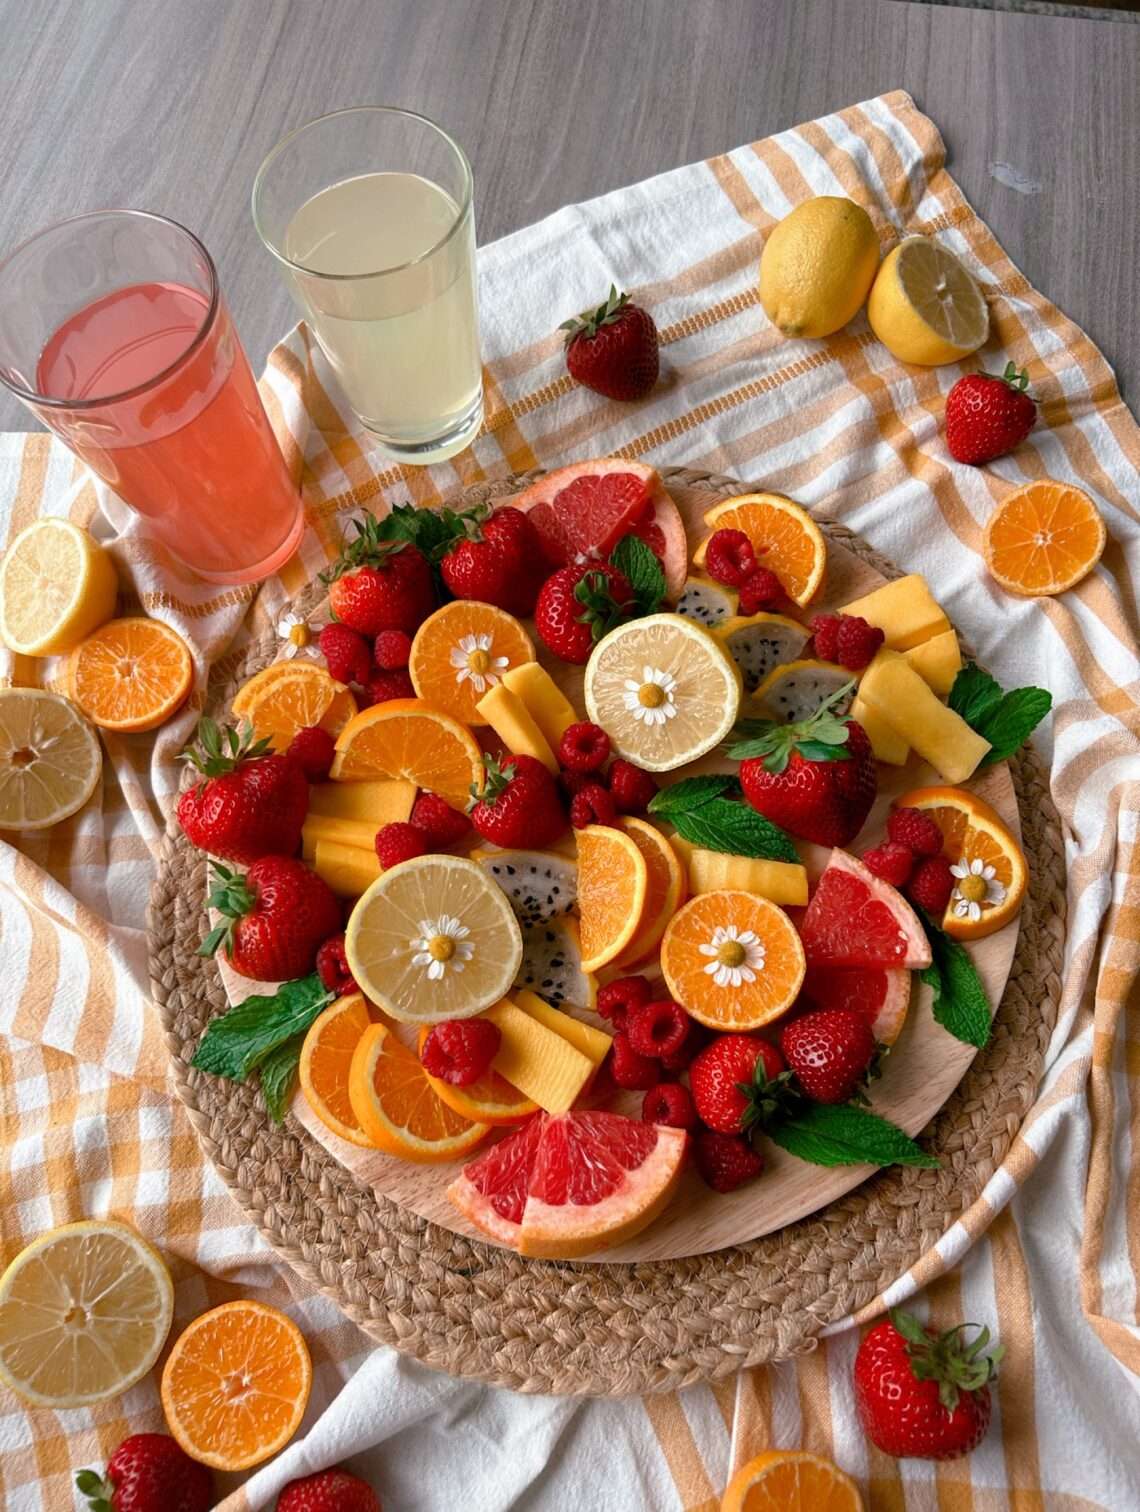 An overview of the lemonade inspired fruit board with 2 cups of lemonade next to it.